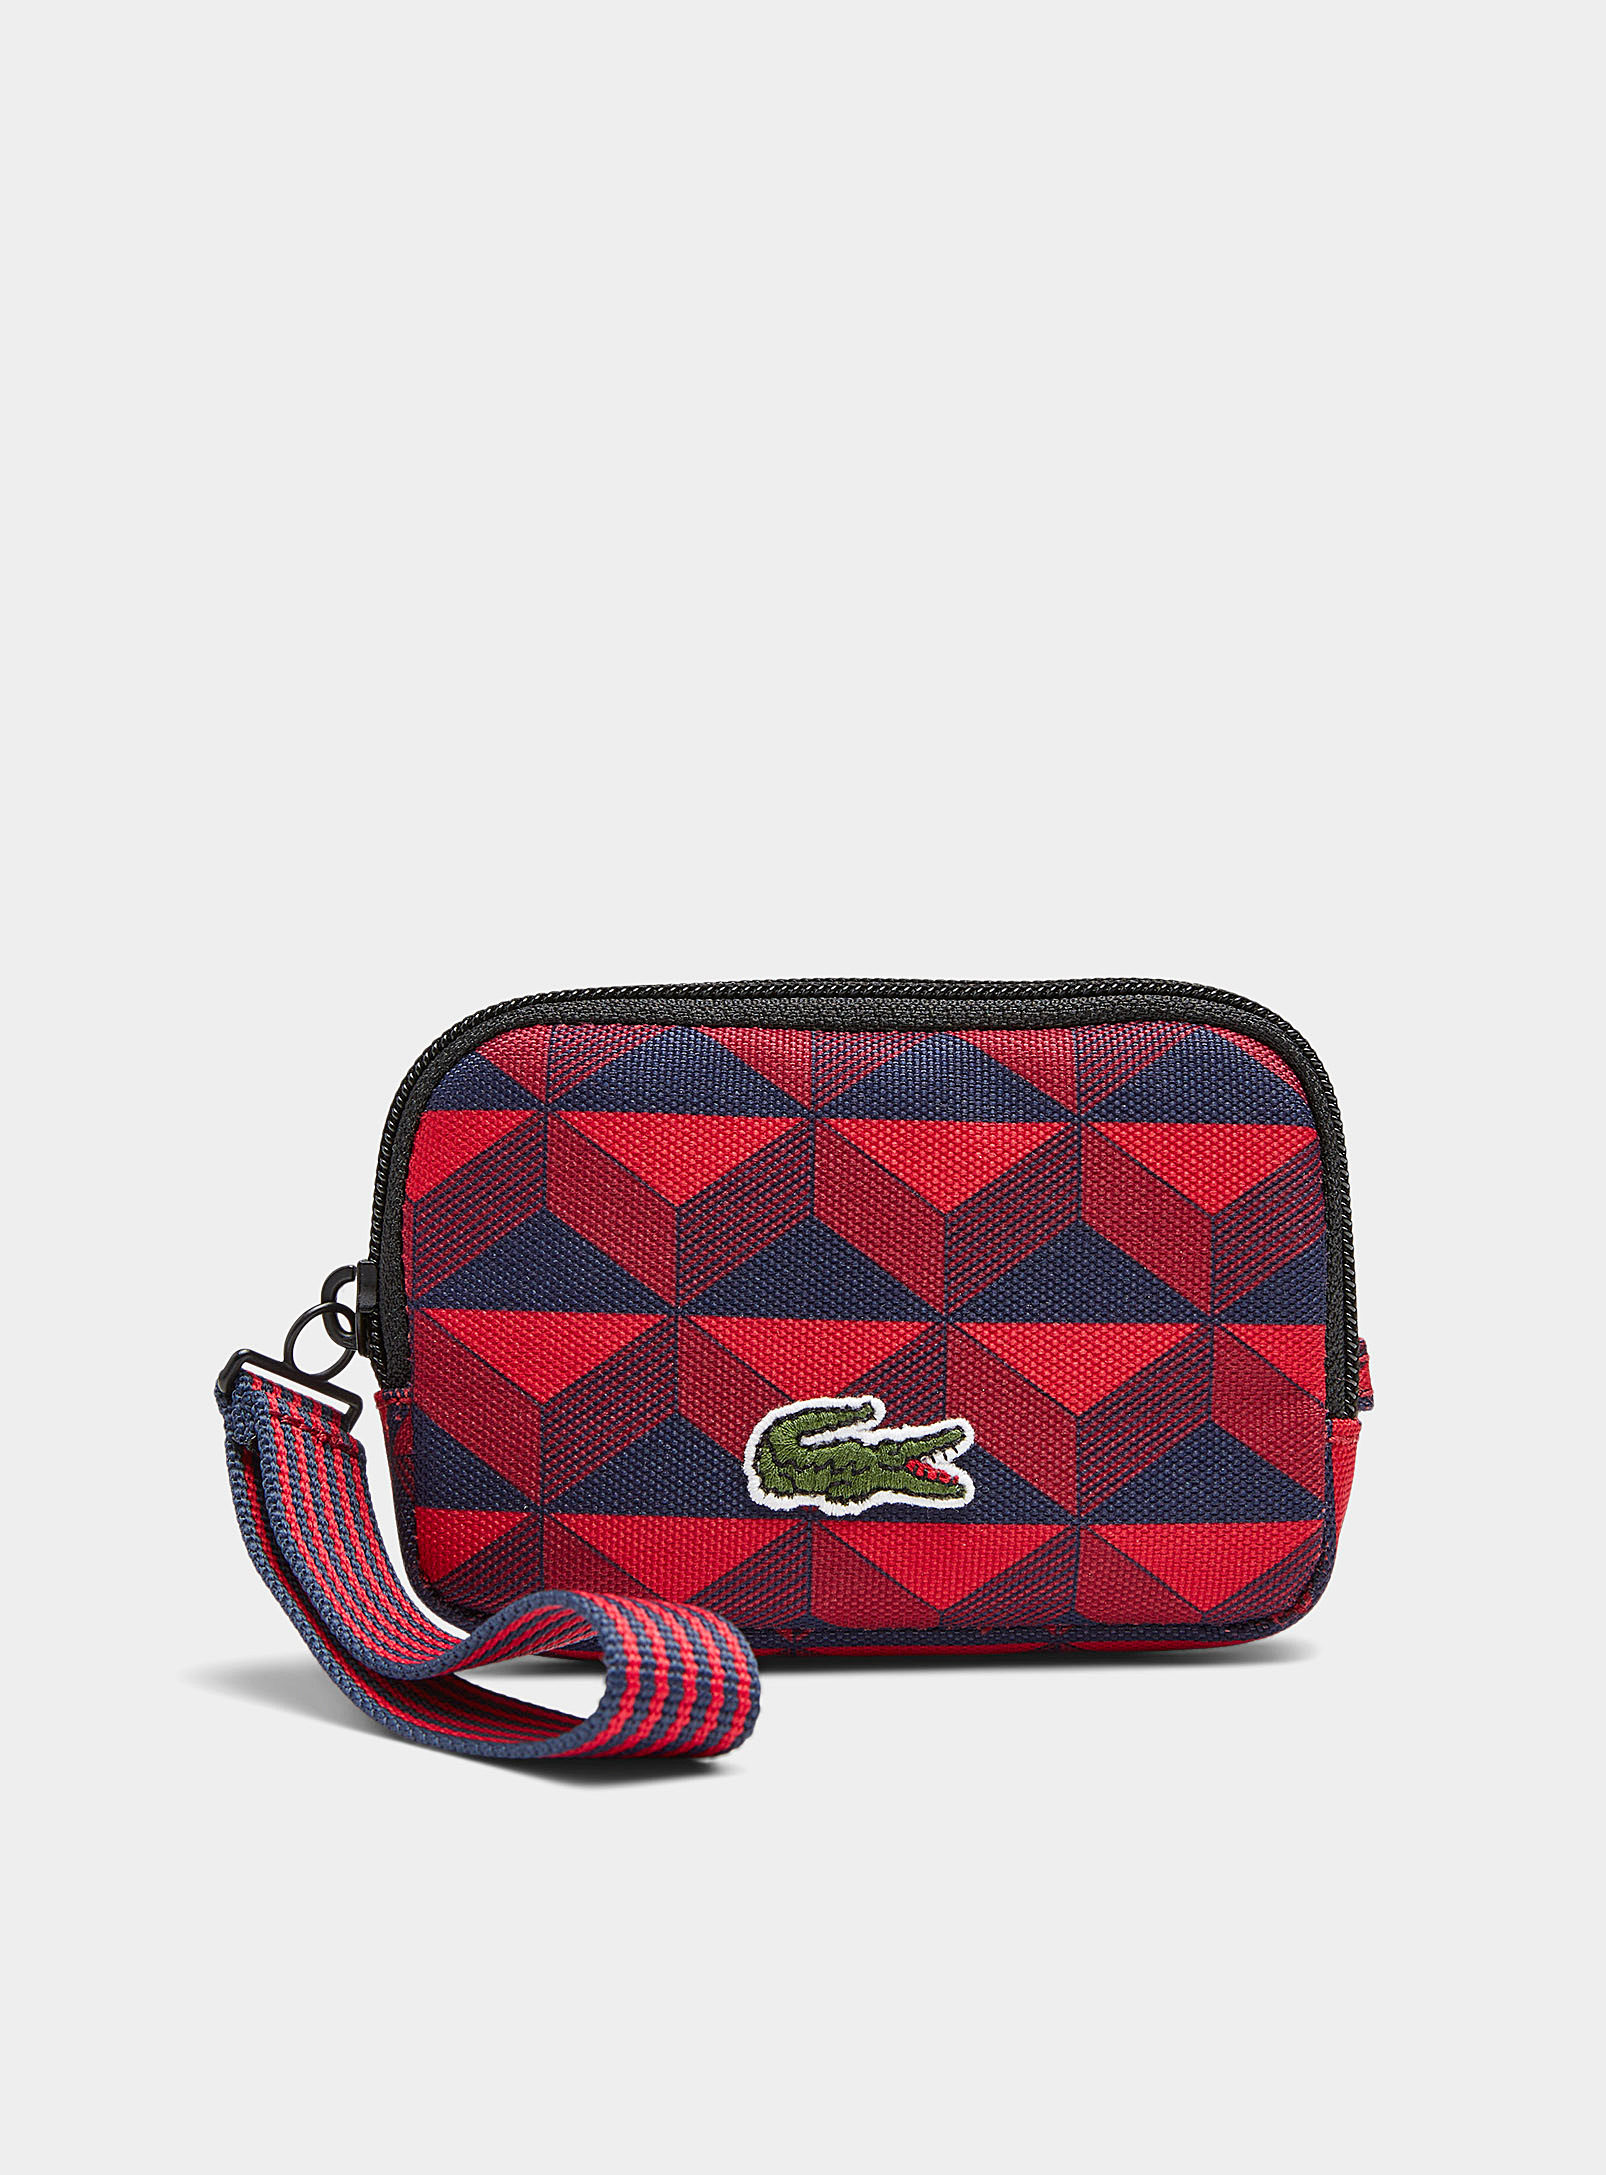 Lacoste - Men's Small patterned fabric wallet